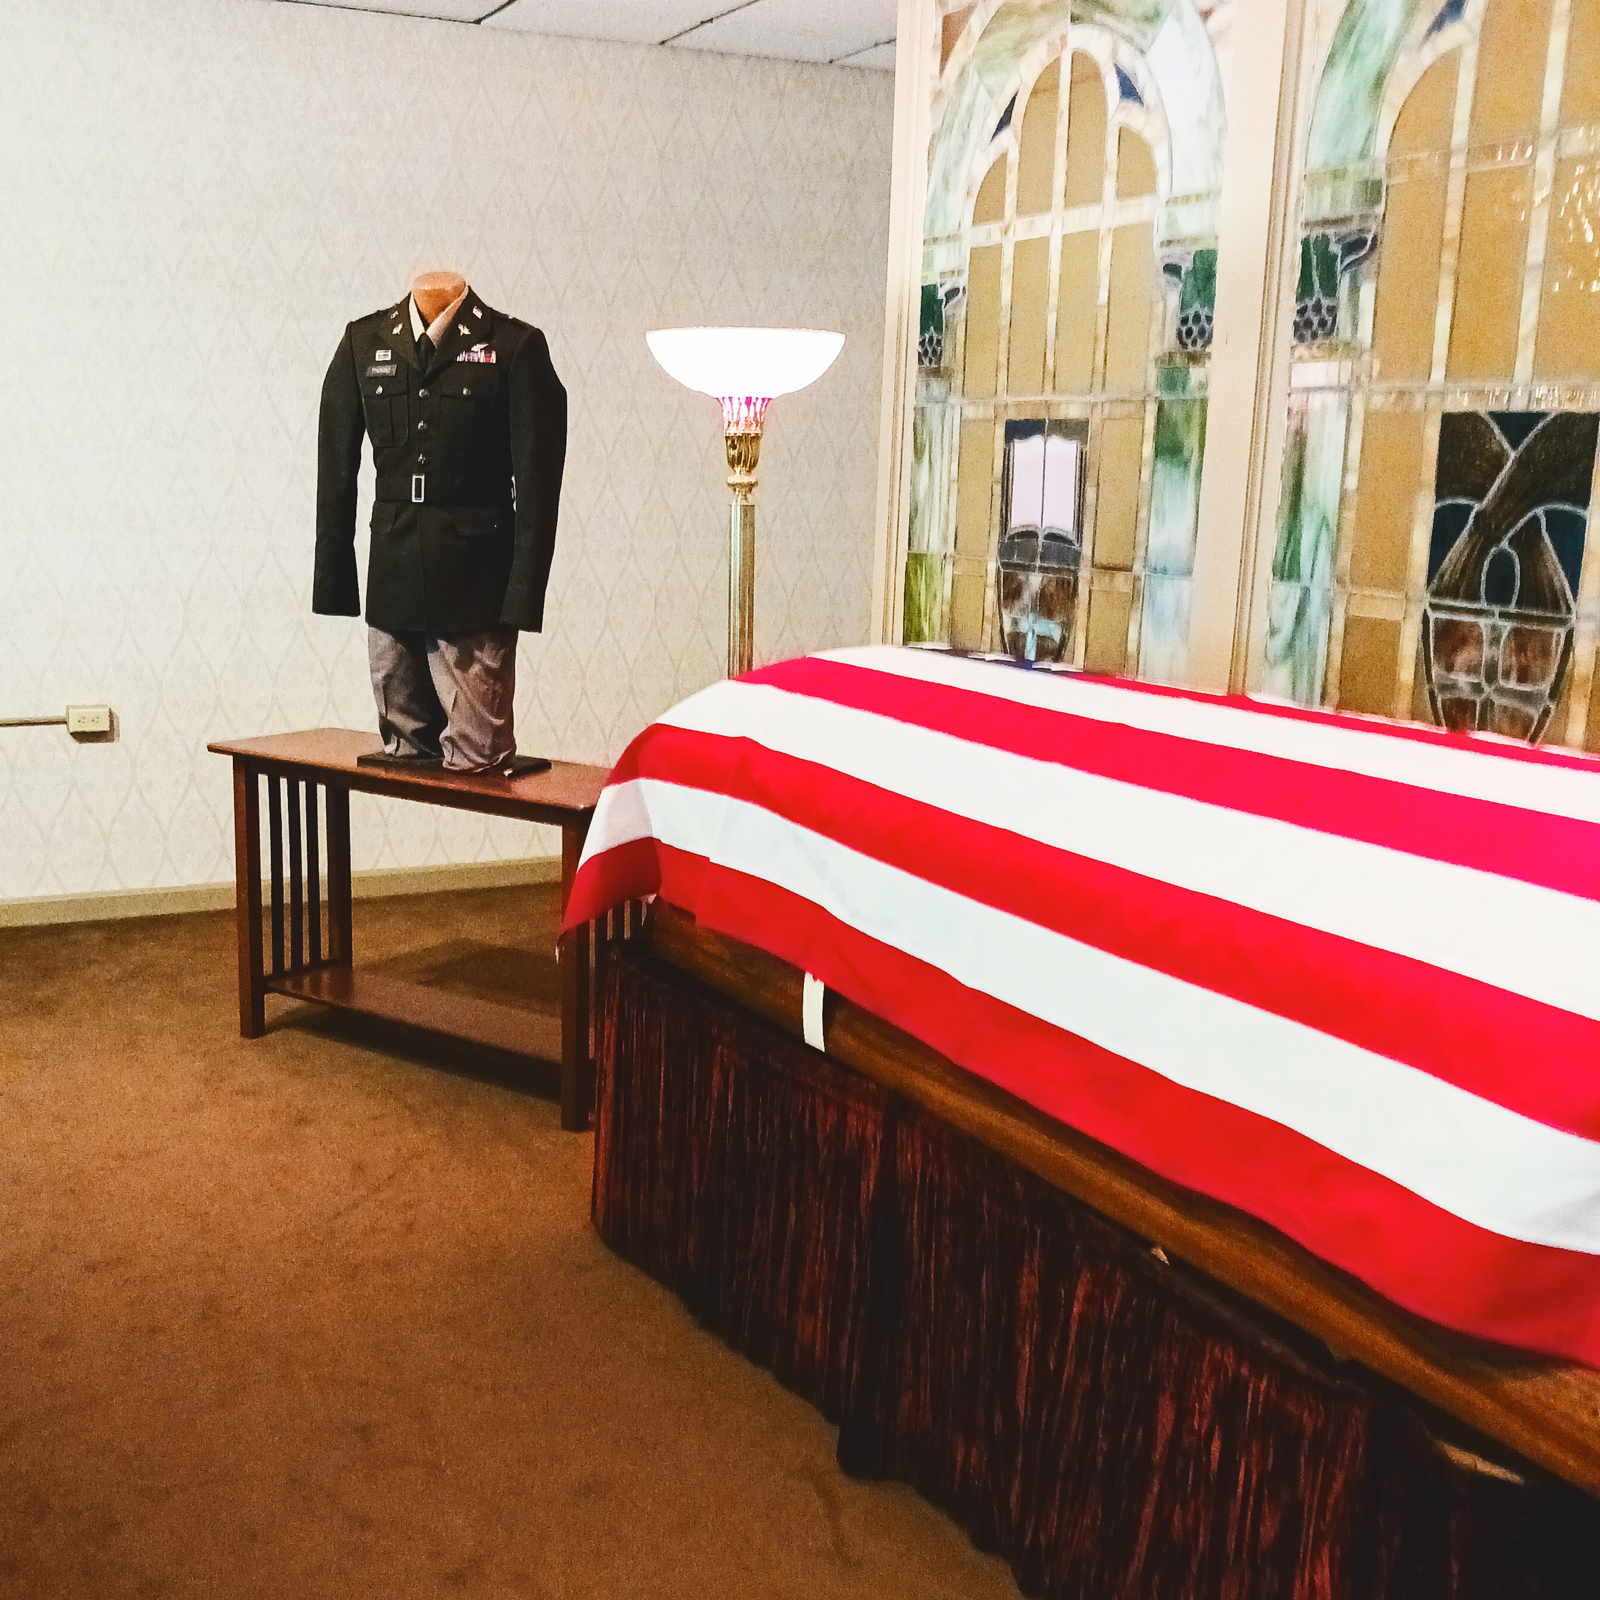 A military funeral with a casket covered by an American flag